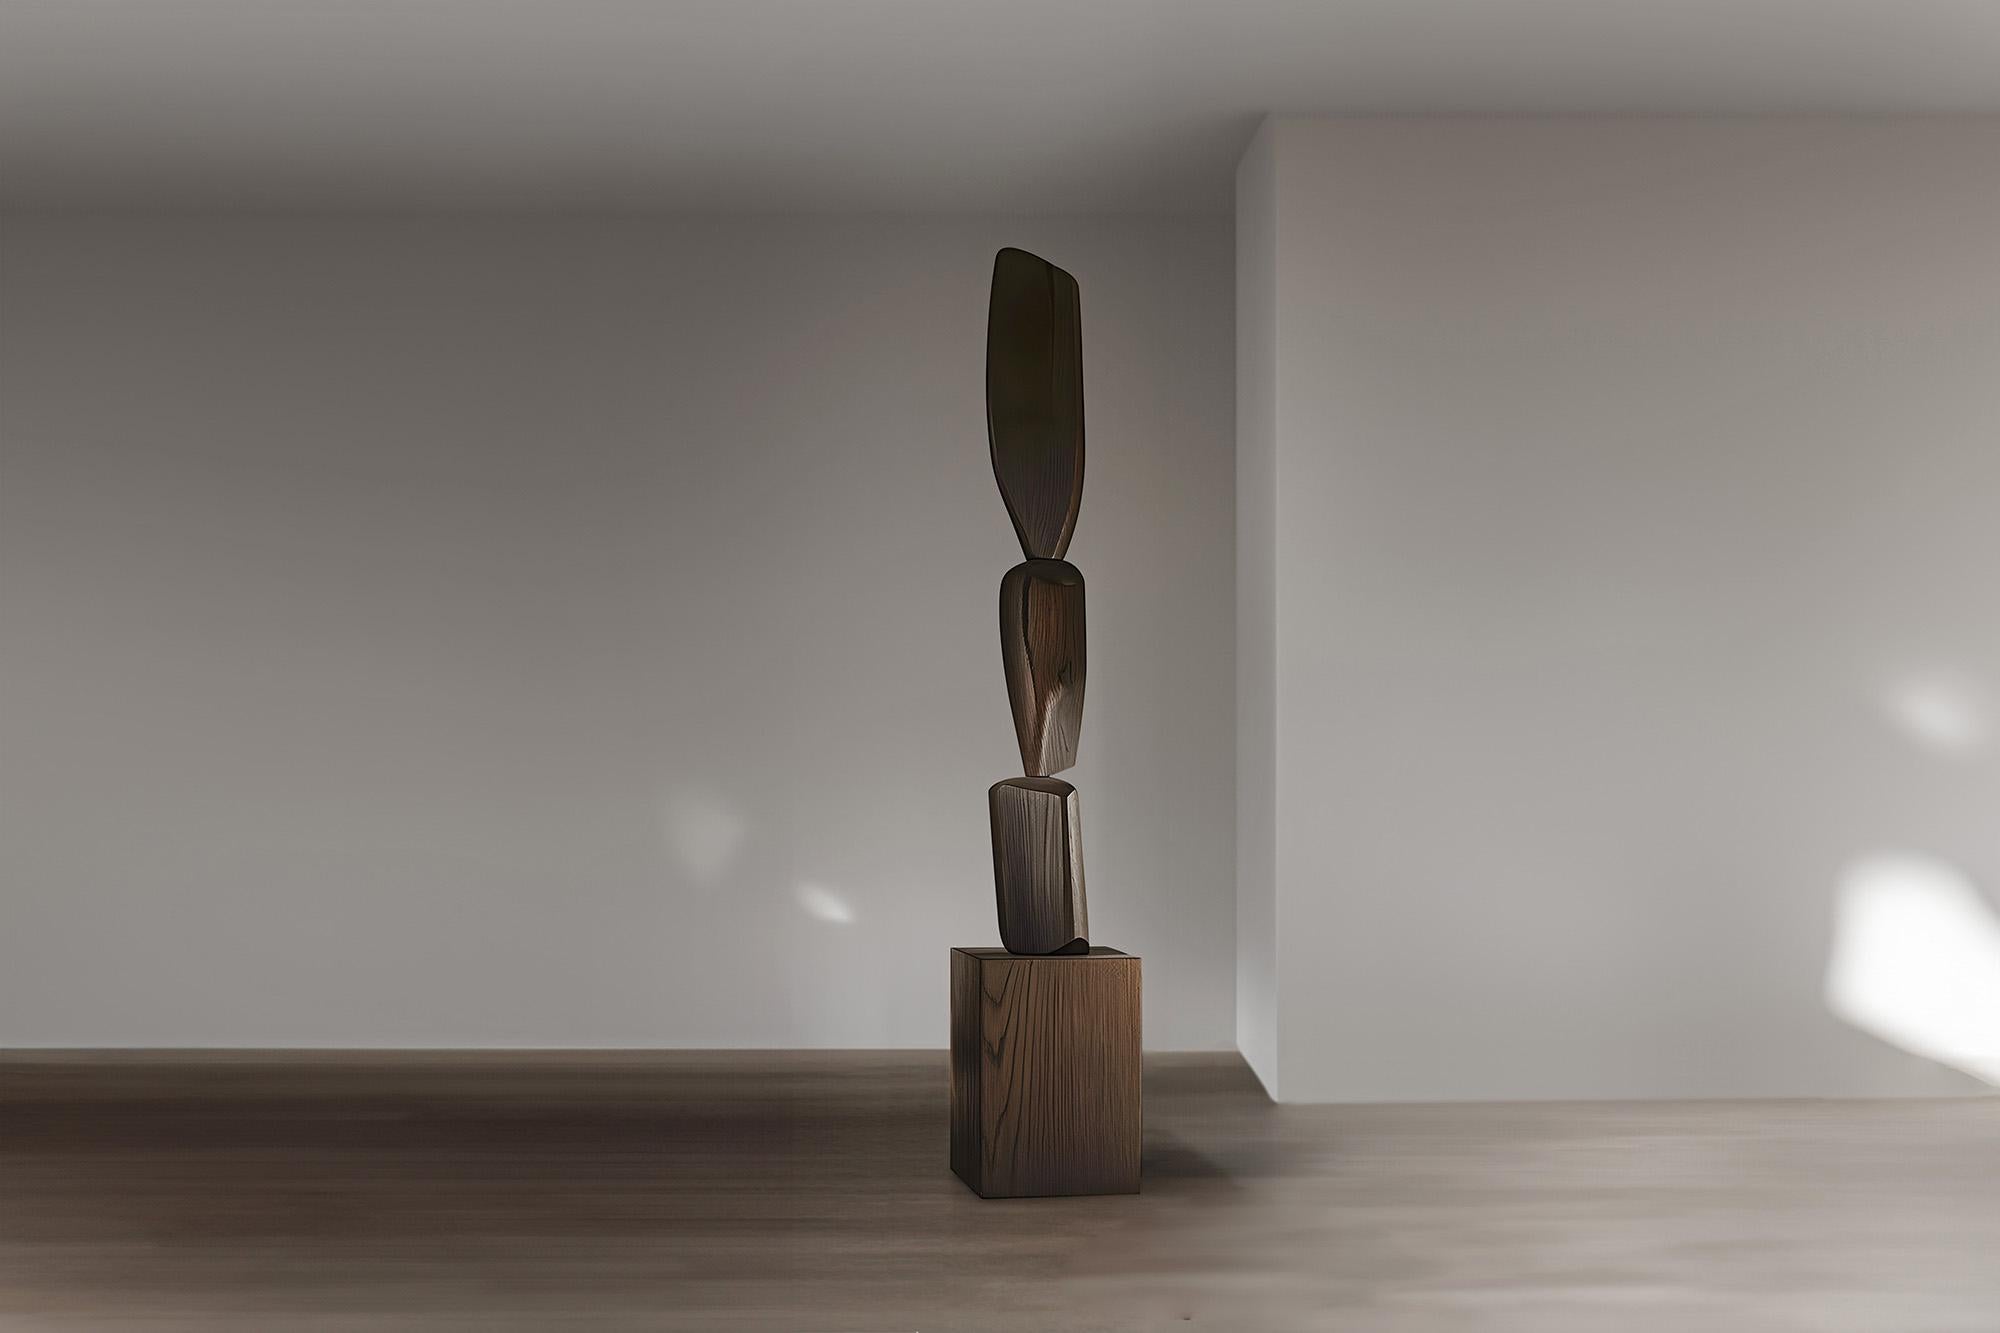 Modern Elegance Unveiled in Dark Burned Oak, NONO's Still Stand No89

——


Joel Escalona's wooden standing sculptures are objects of raw beauty and serene grace. Each one is a testament to the power of the material, with smooth curves that flow into